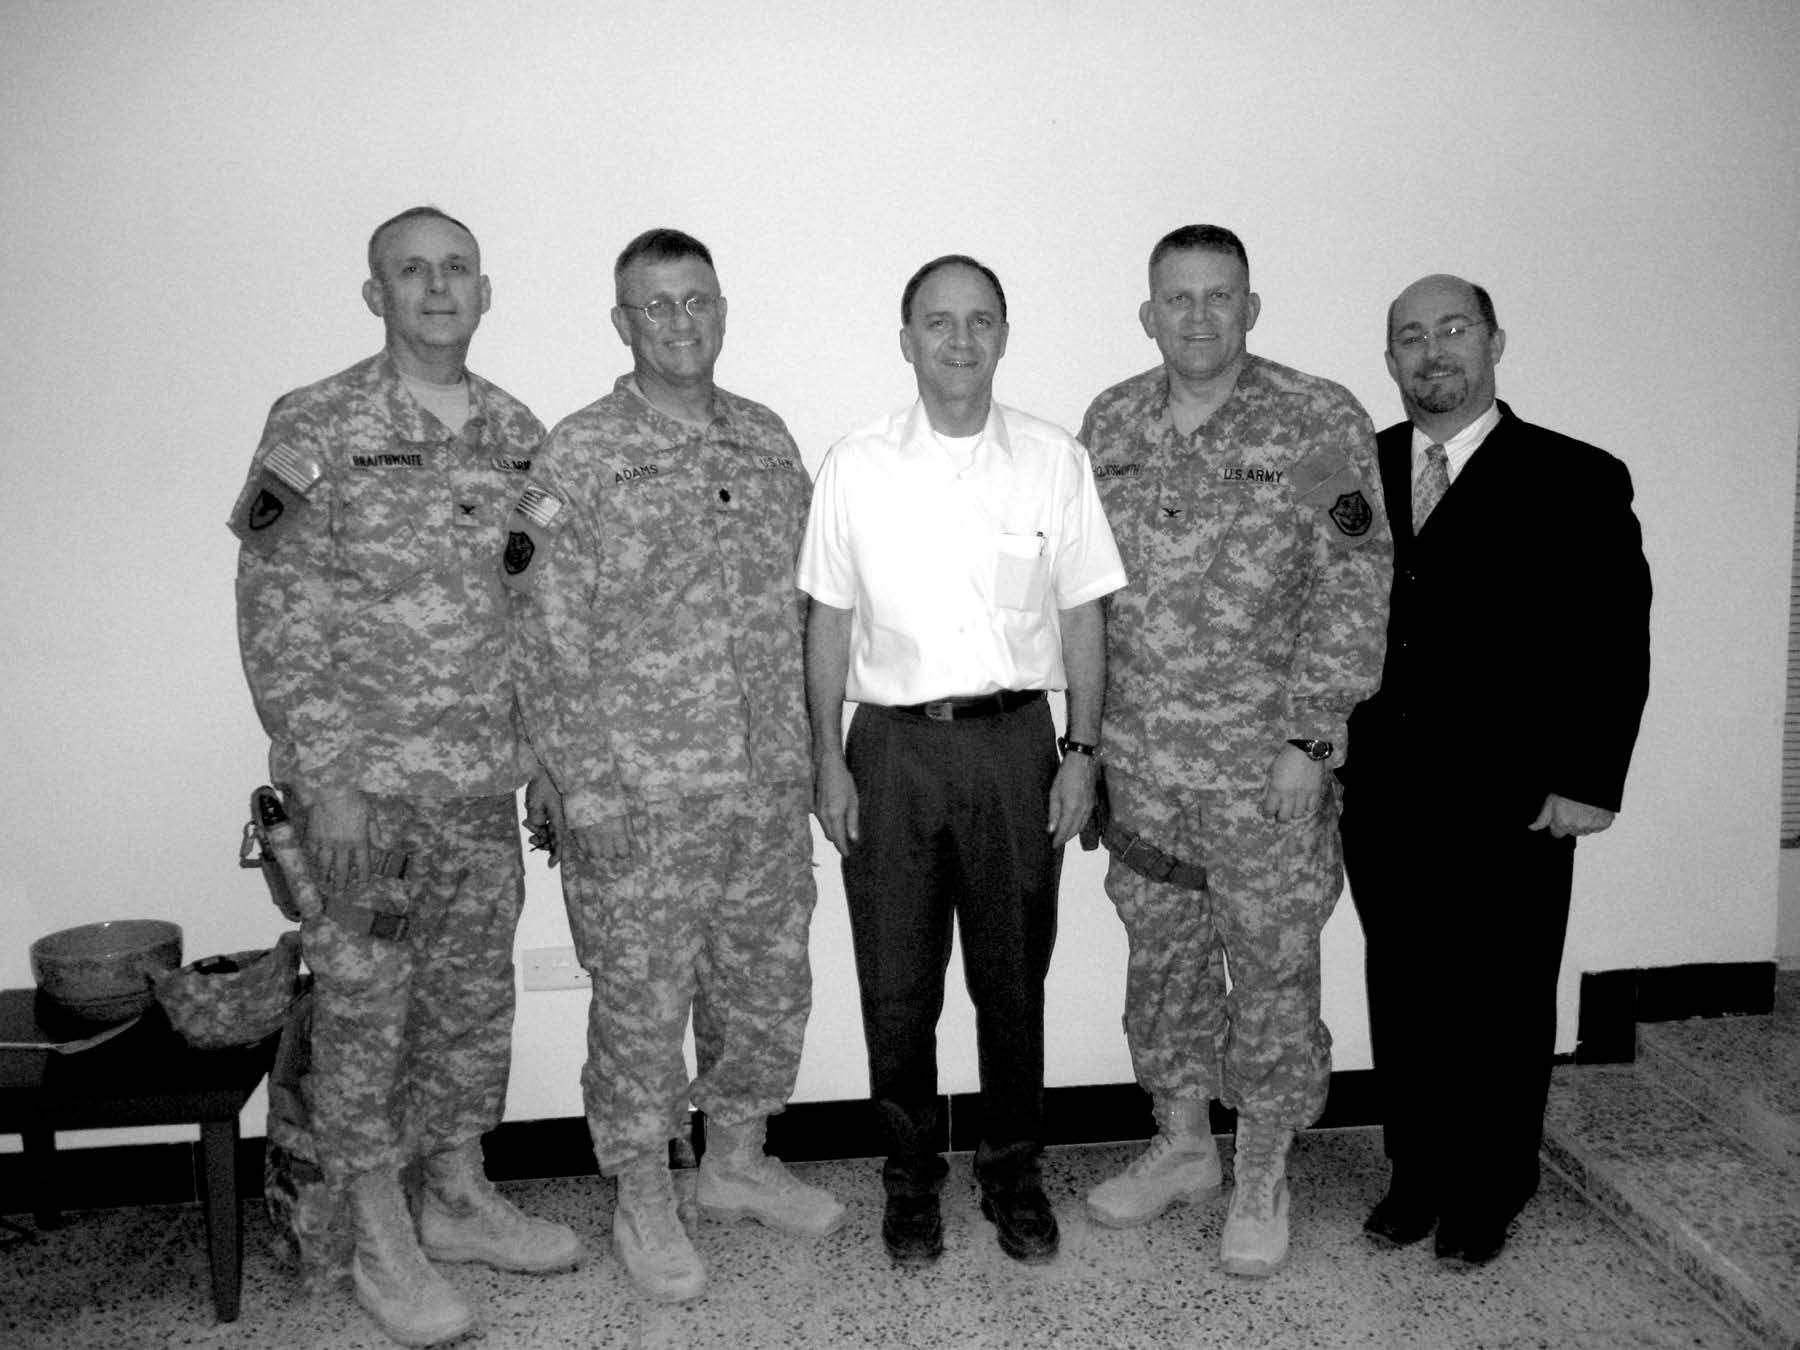 The Baghdad Iraq Military District was organized by Elder Paul B. Pieper in November 2009. From left to right: Alan Braithwaite, executive secretary; Greg Adams, second counselor; Elder Paul B. Pieper, General Authority Seventy; Guy M. Hollingsworth, district president; and James Phipps, first counselor. Courtesy of Guy M. Hollingsworth.